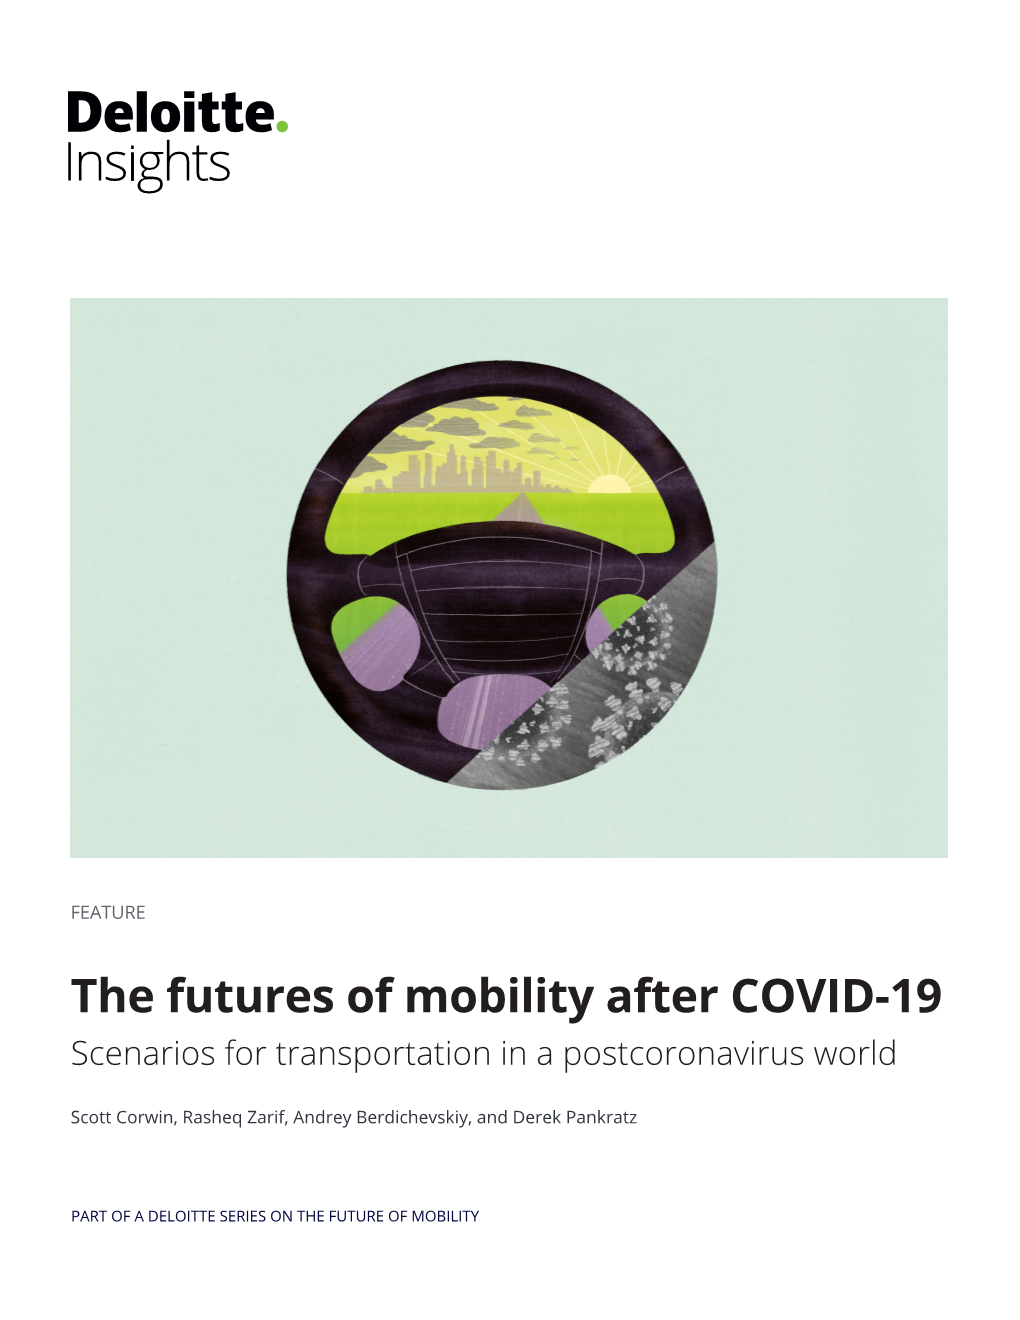 The Futures of Mobility After COVID-19 Scenarios for Transportation in a Postcoronavirus World